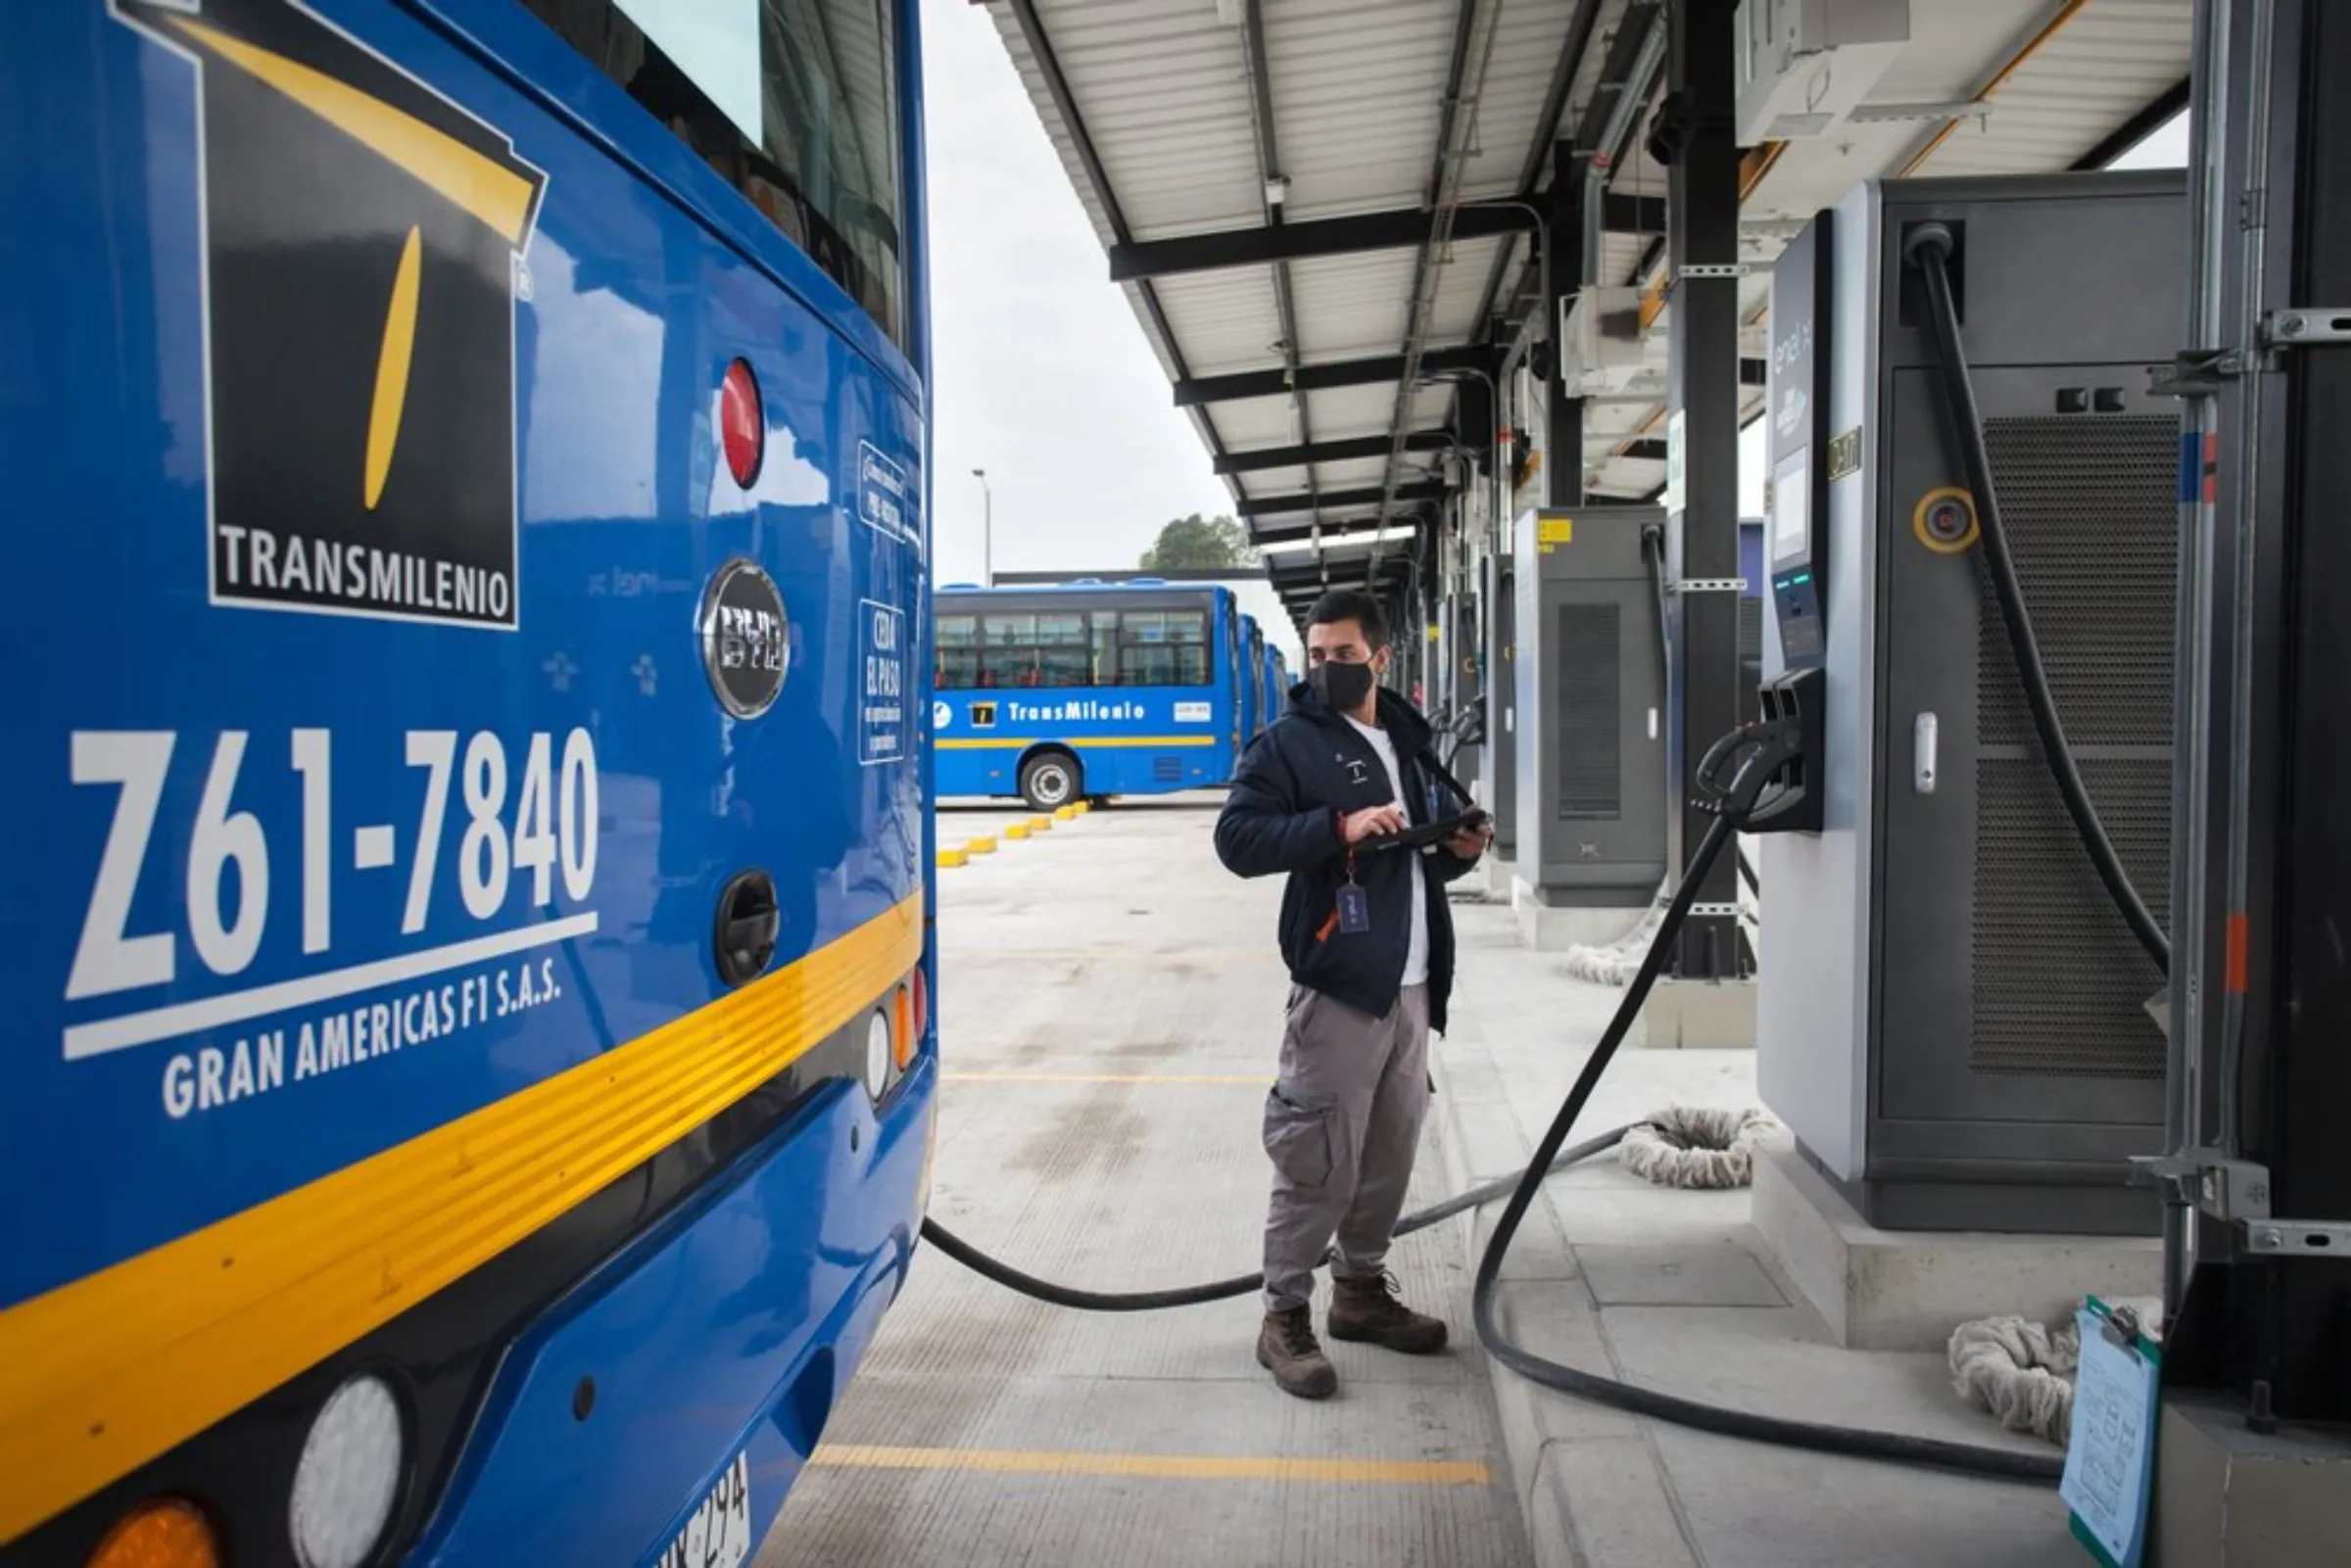 A technician checks an electric bus at a new charging depot built near the airport in Bogota, Colombia, April 21, 2021